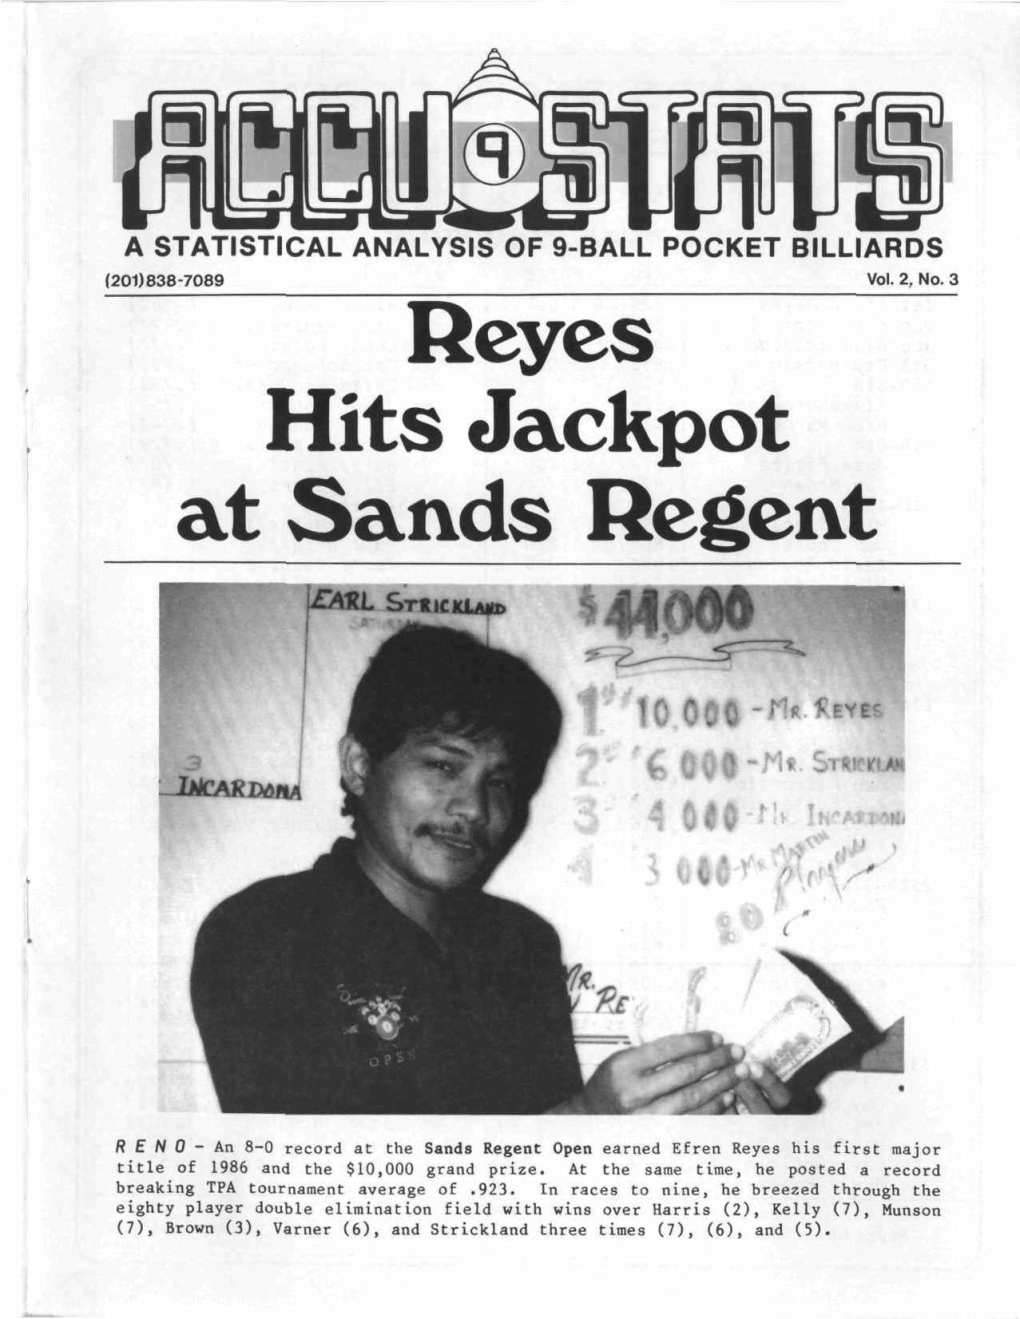 Efren Reyes His First Major Title of 1986 and the $10,000 Grand Prize